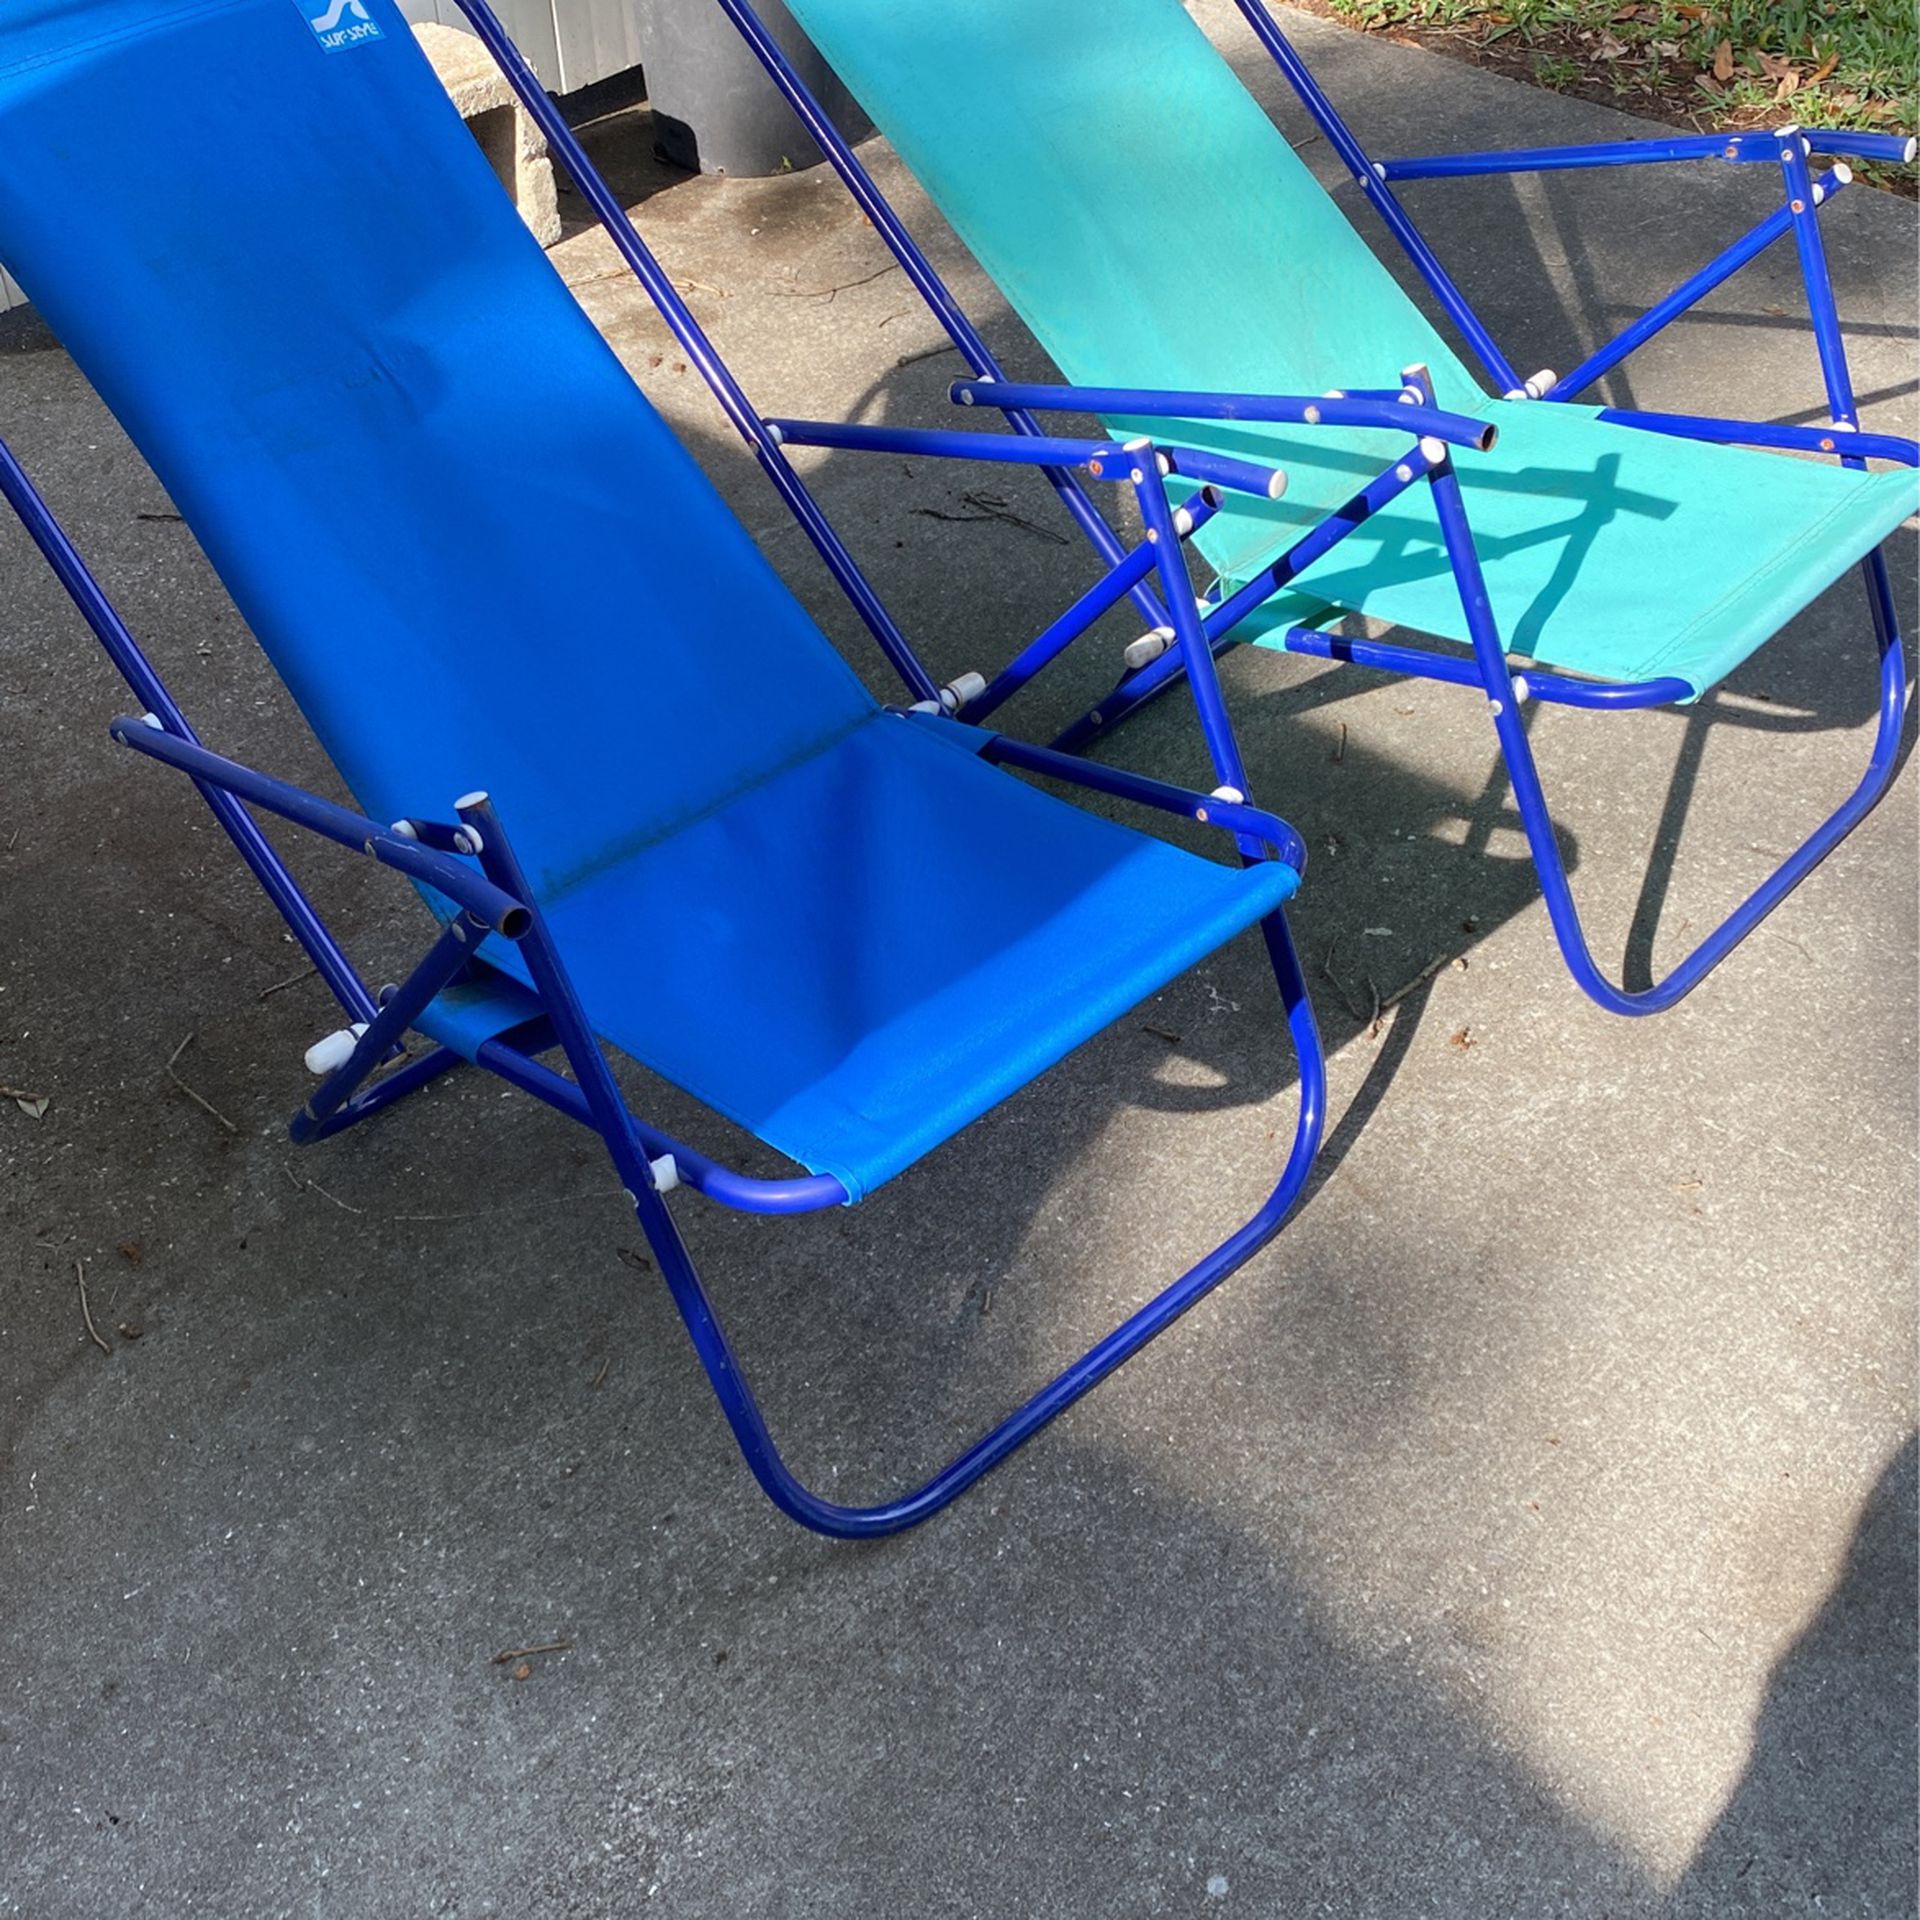 Beach Chairs $12  And Floats $10